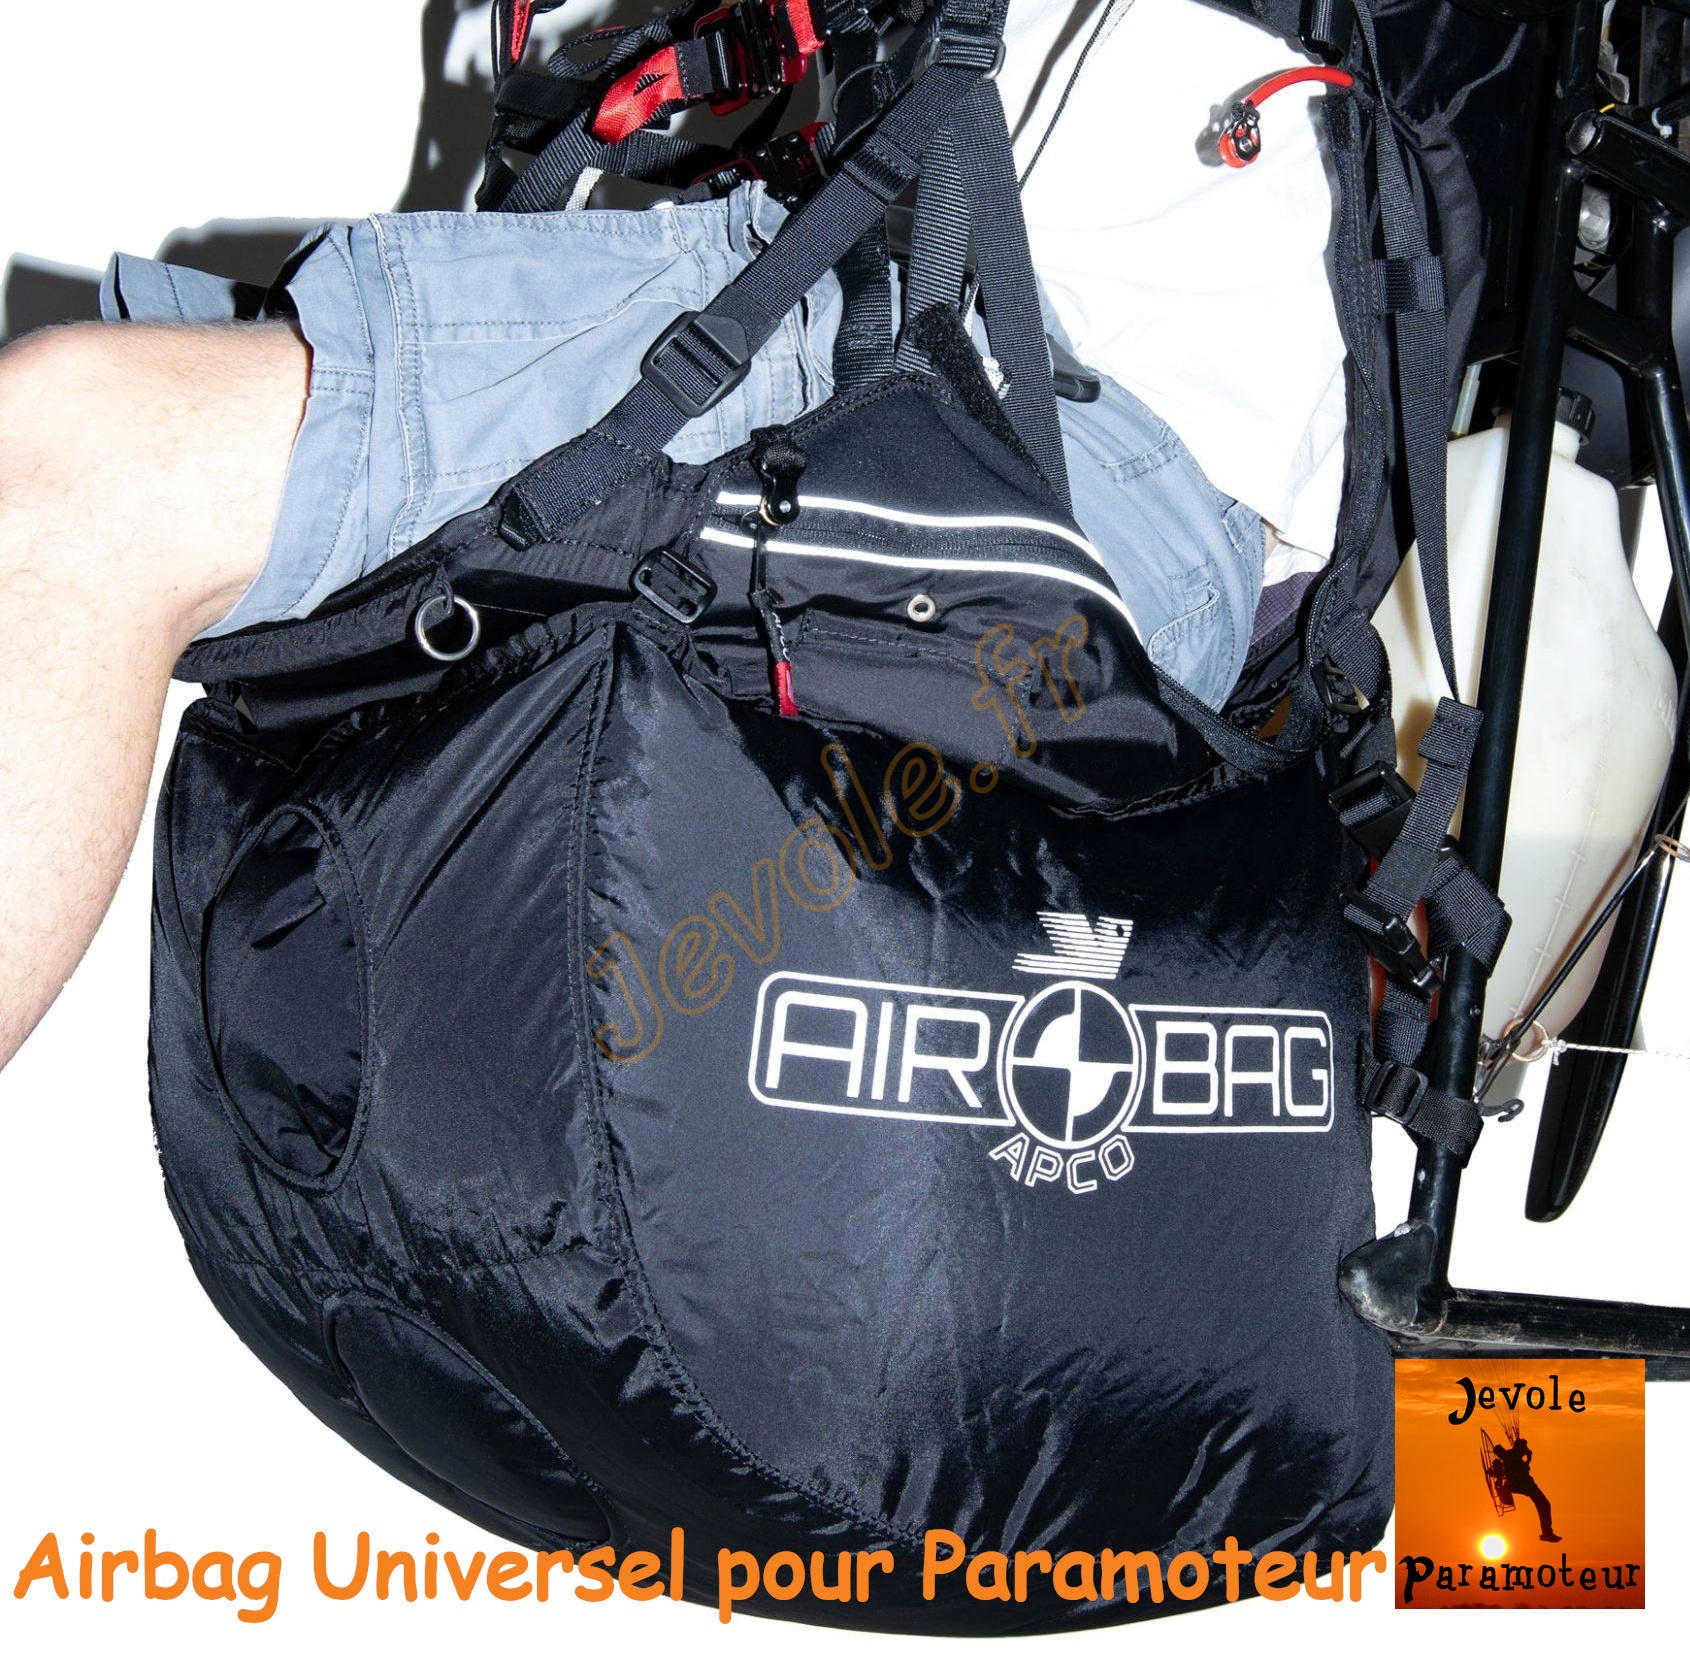 airbag-universel-paramoteur-protection 2